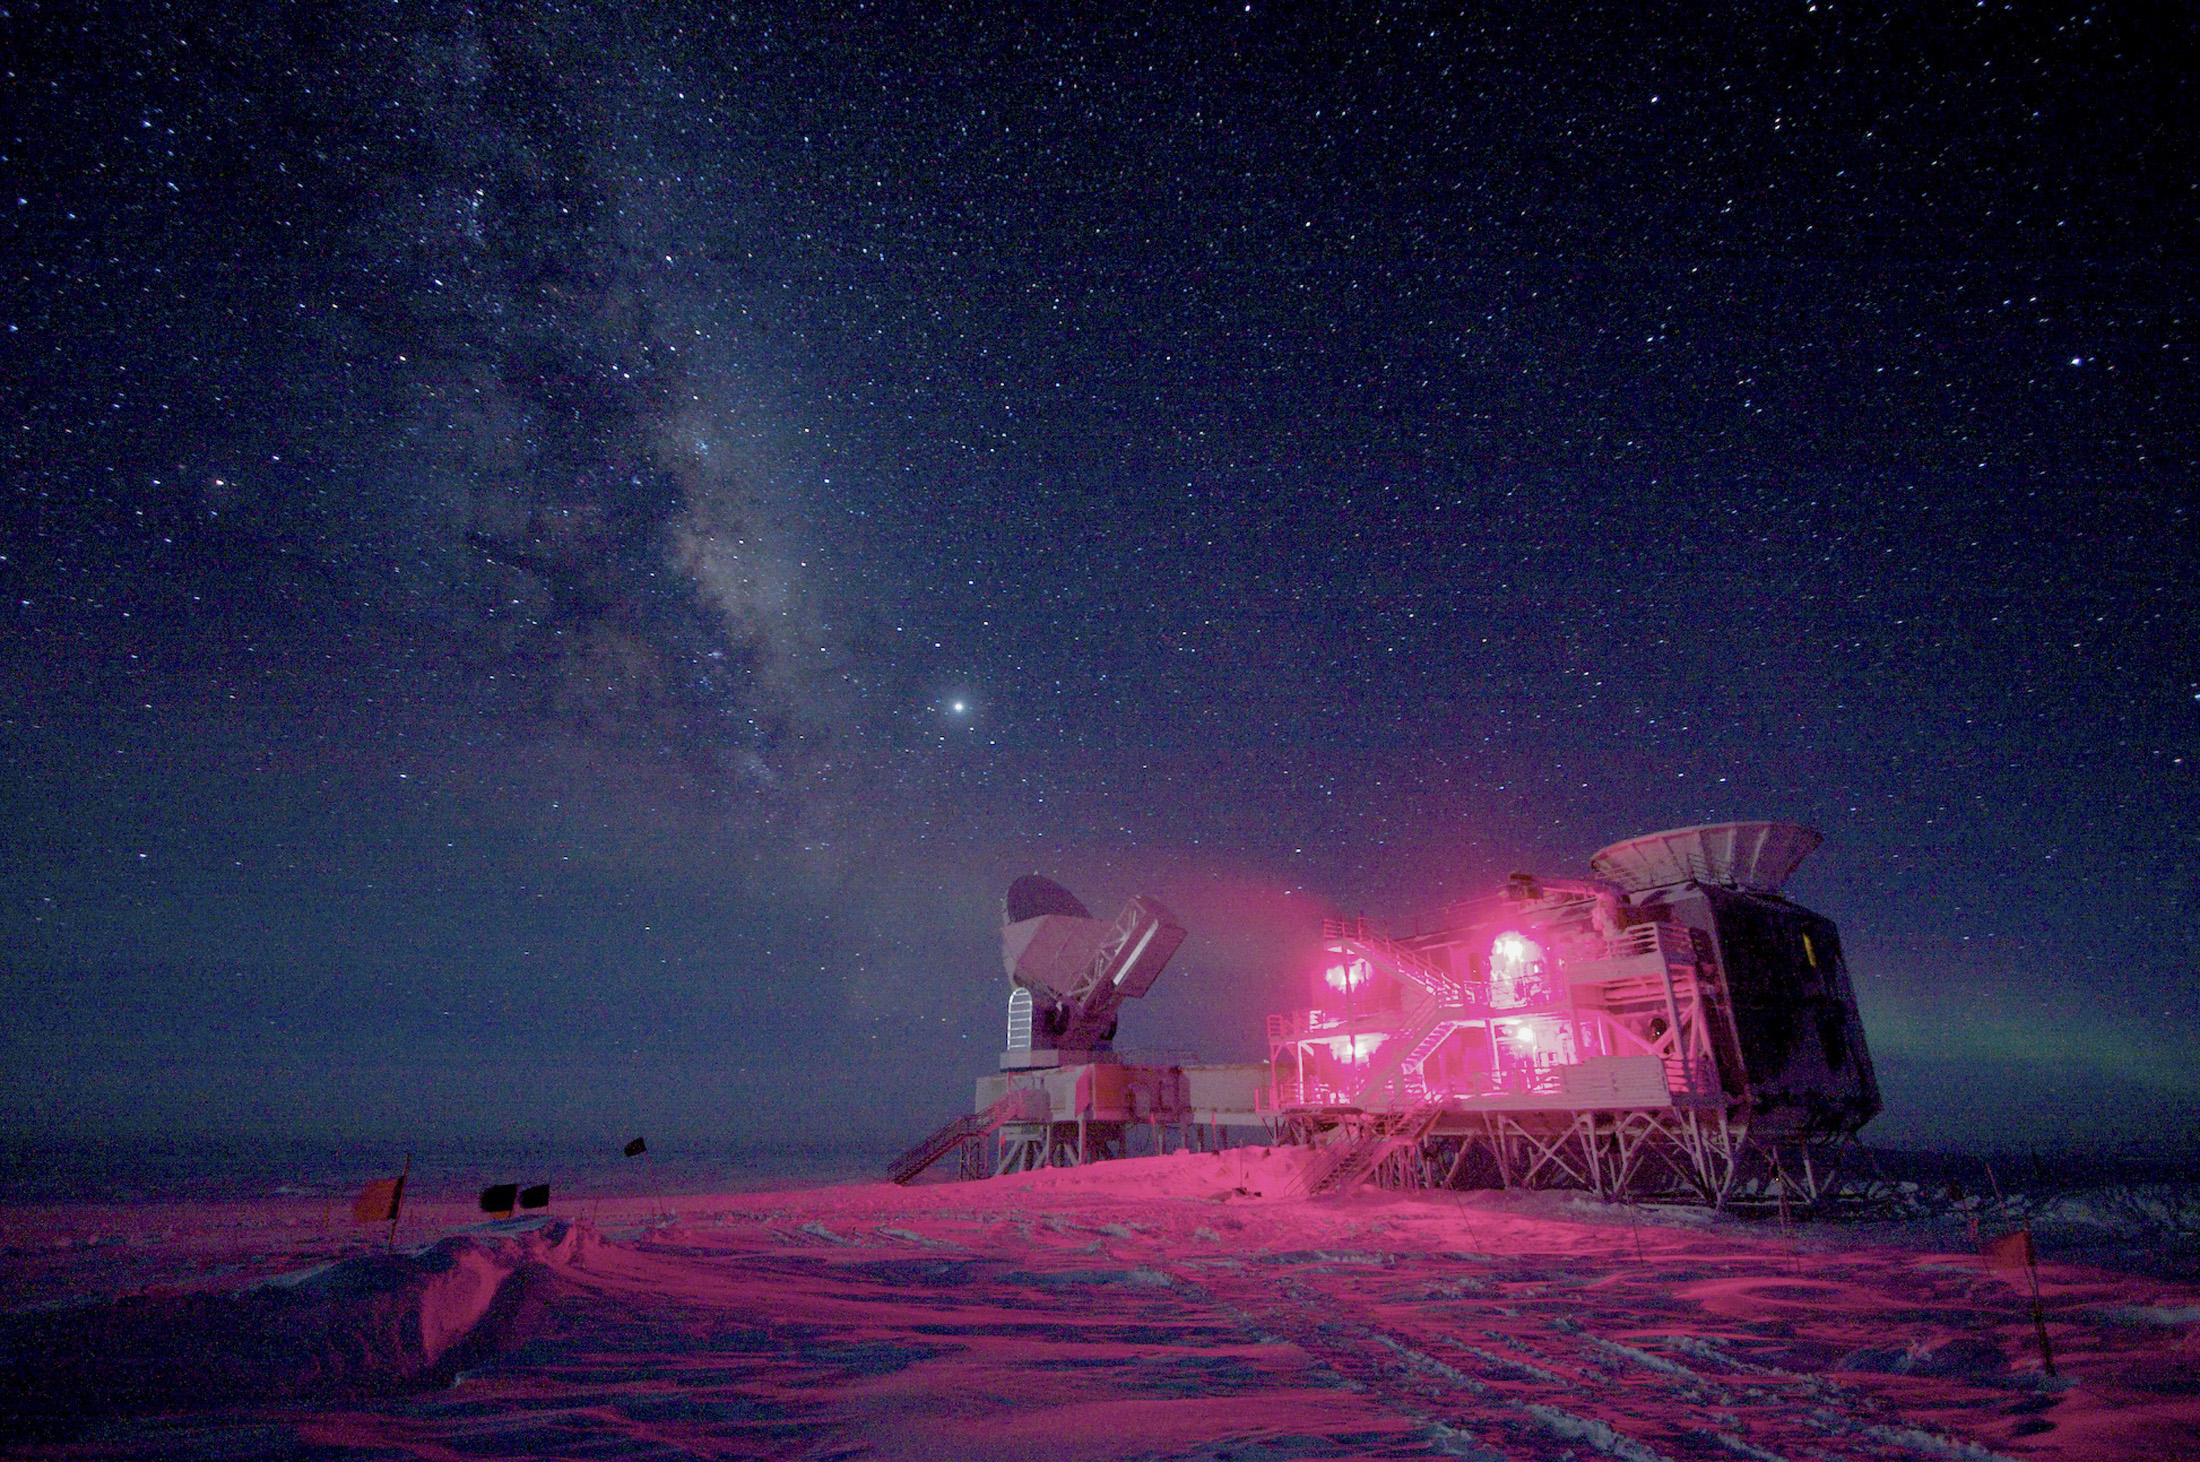 The South Pole Telescope and the BICEP Telescope at Amundsen-Scott South Pole Station in August 2008. Photo by Keith Vanderlinde/National Science Foundation/Handout/Reuters